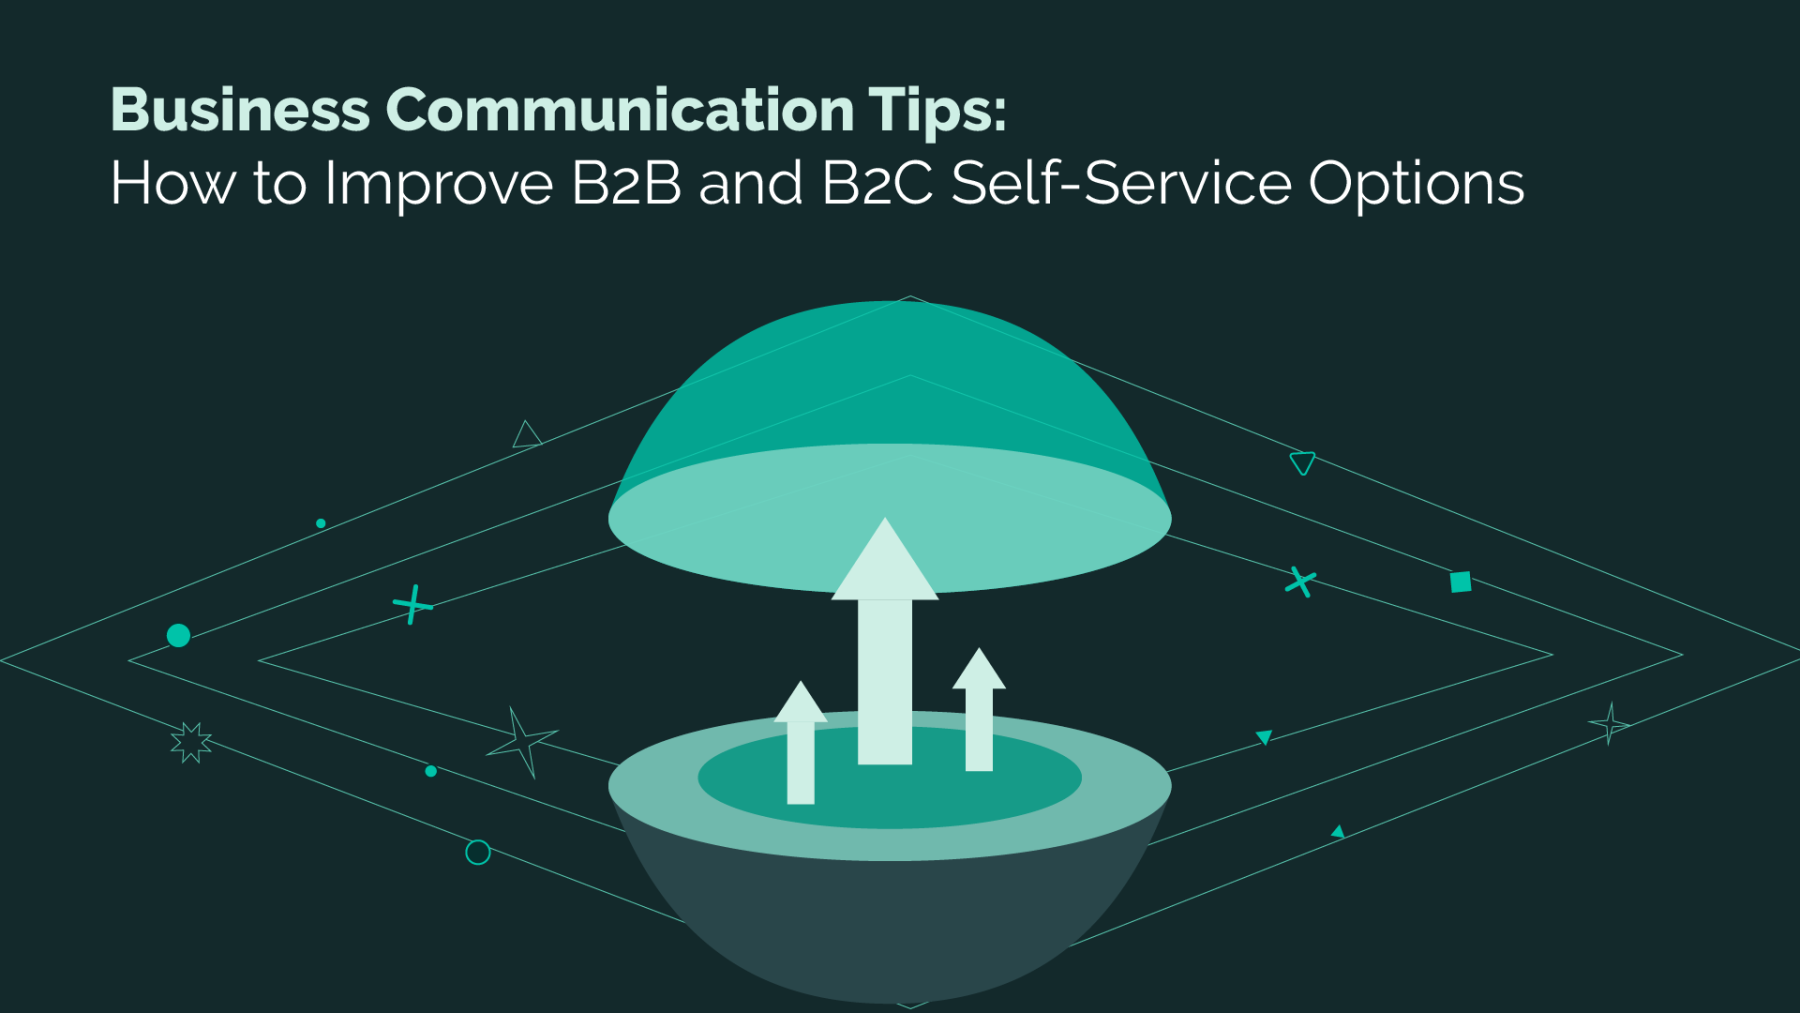 20220214.fya_.Business-Communication-Tips-How-to-Improve-B2B-and-B2C-Self-service-Options.0